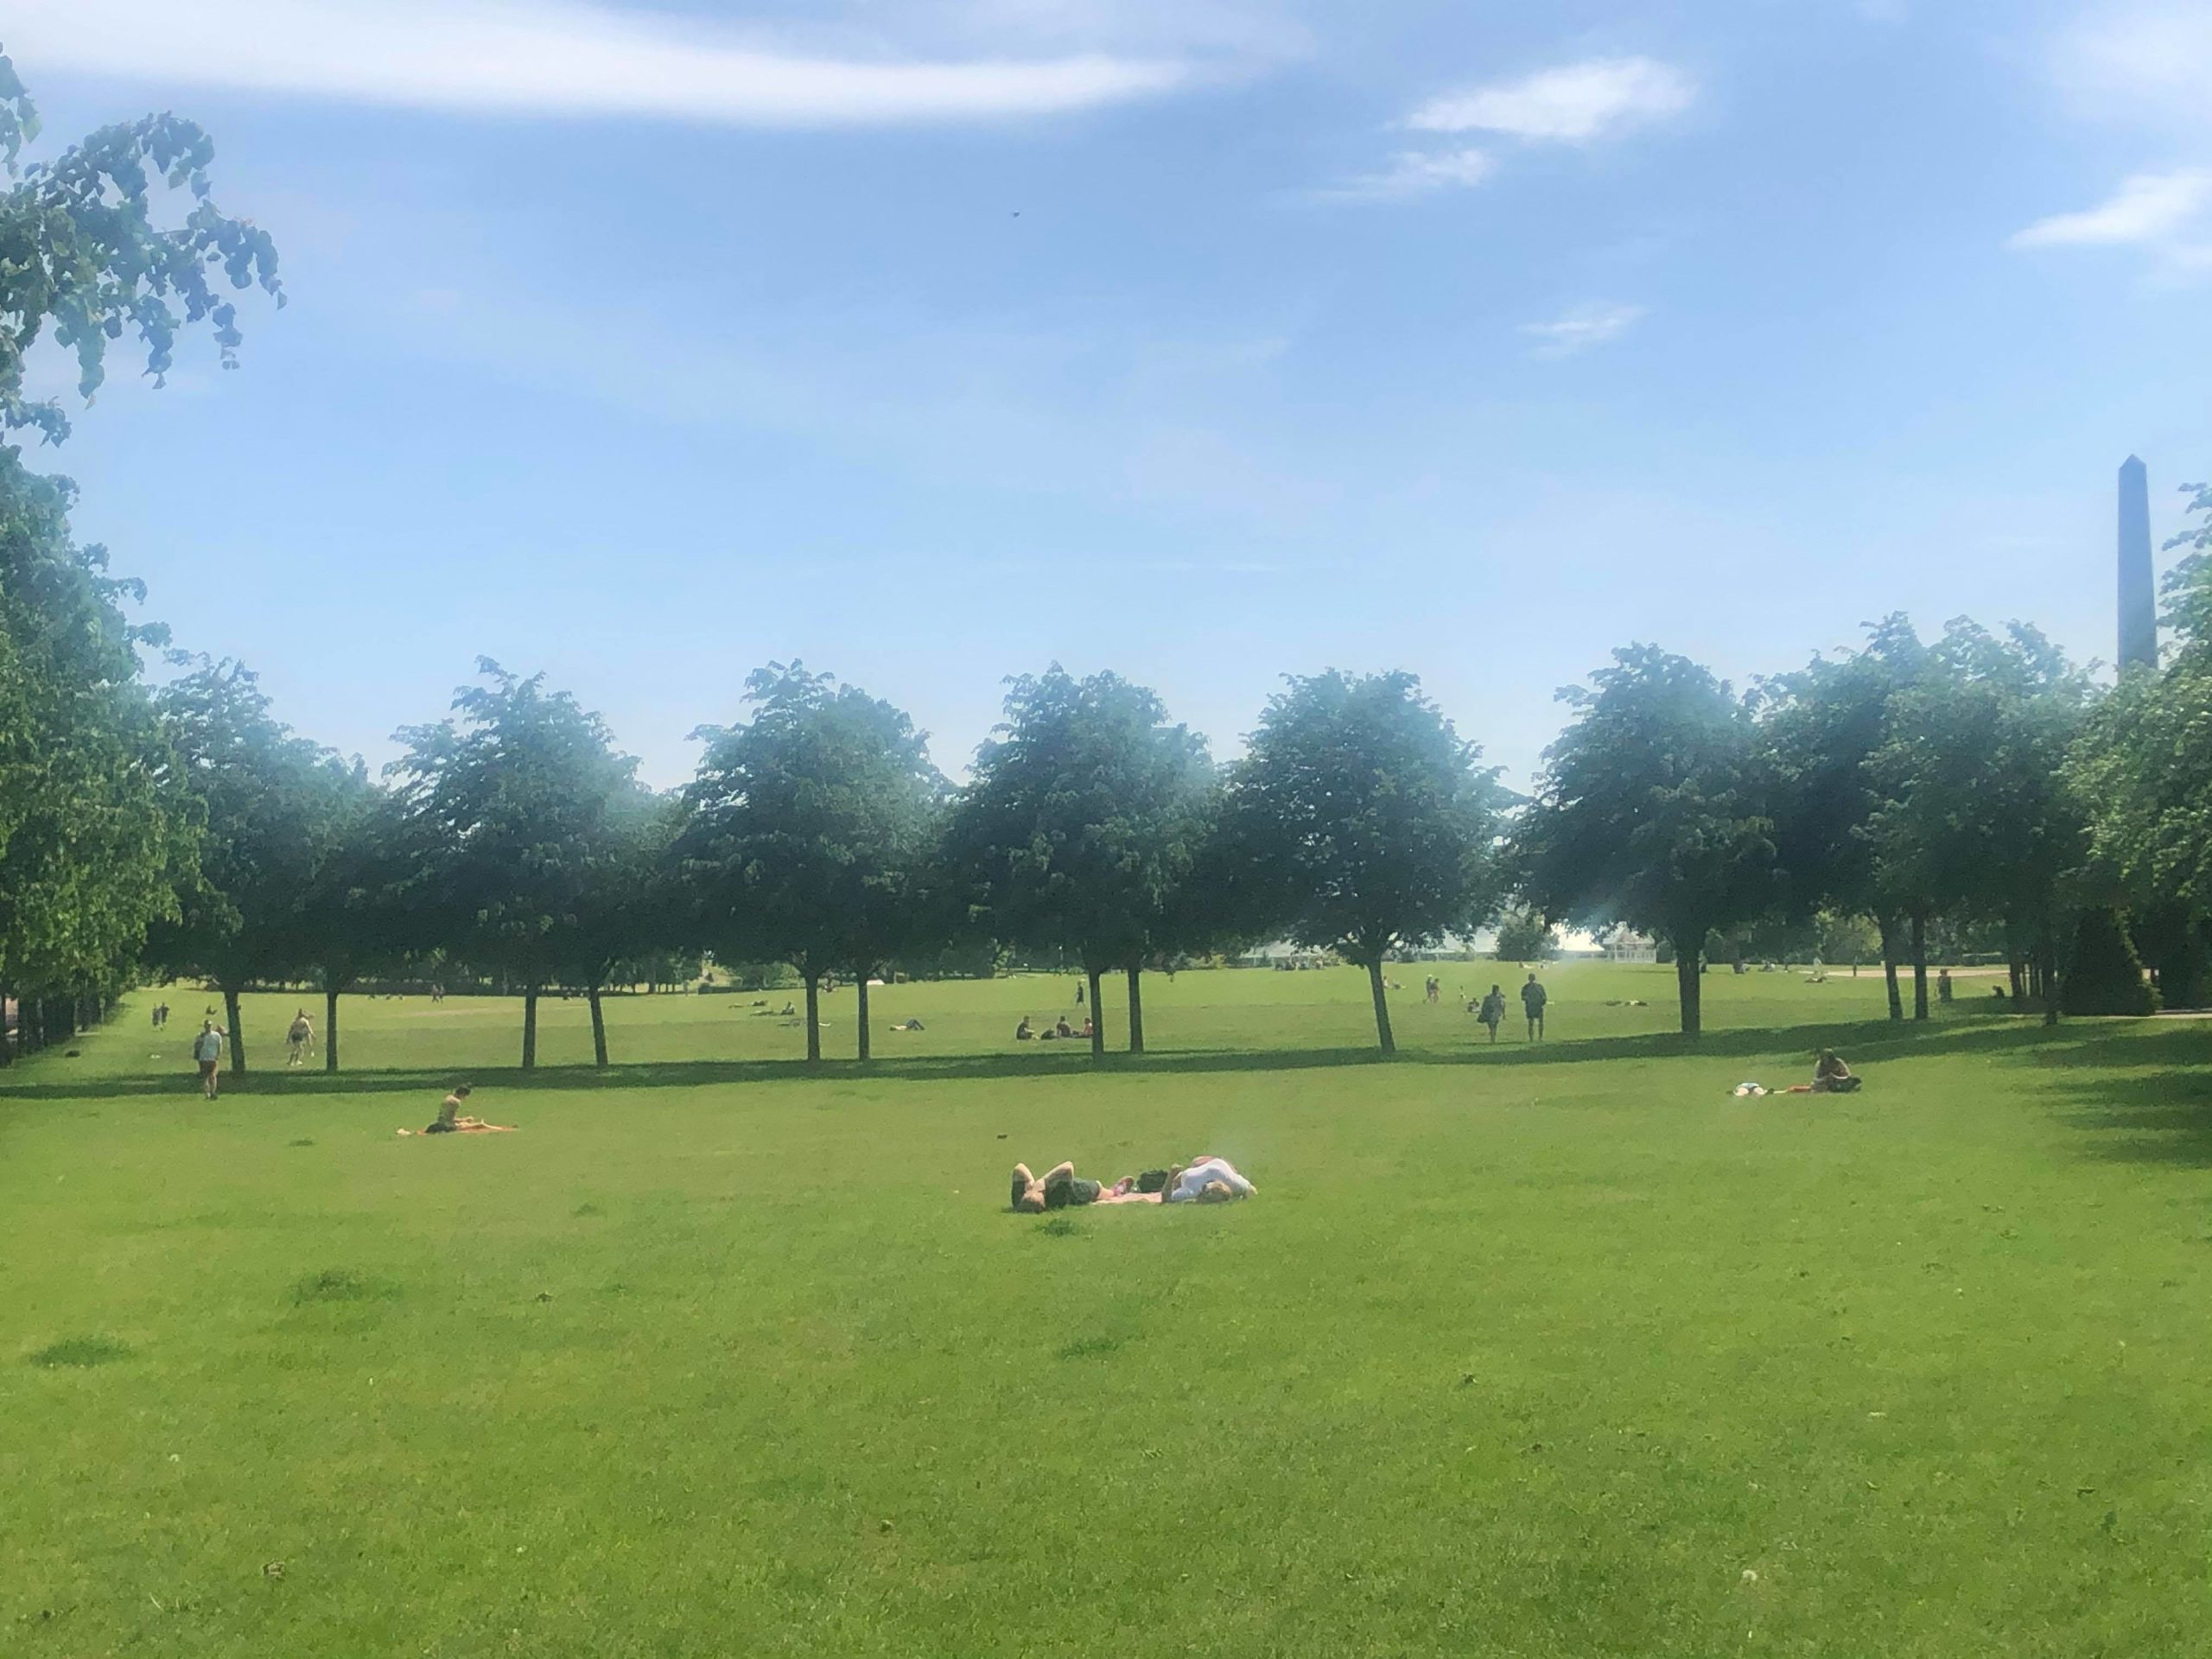 Sunbathers take their spots on the grass at Glasgow Green.